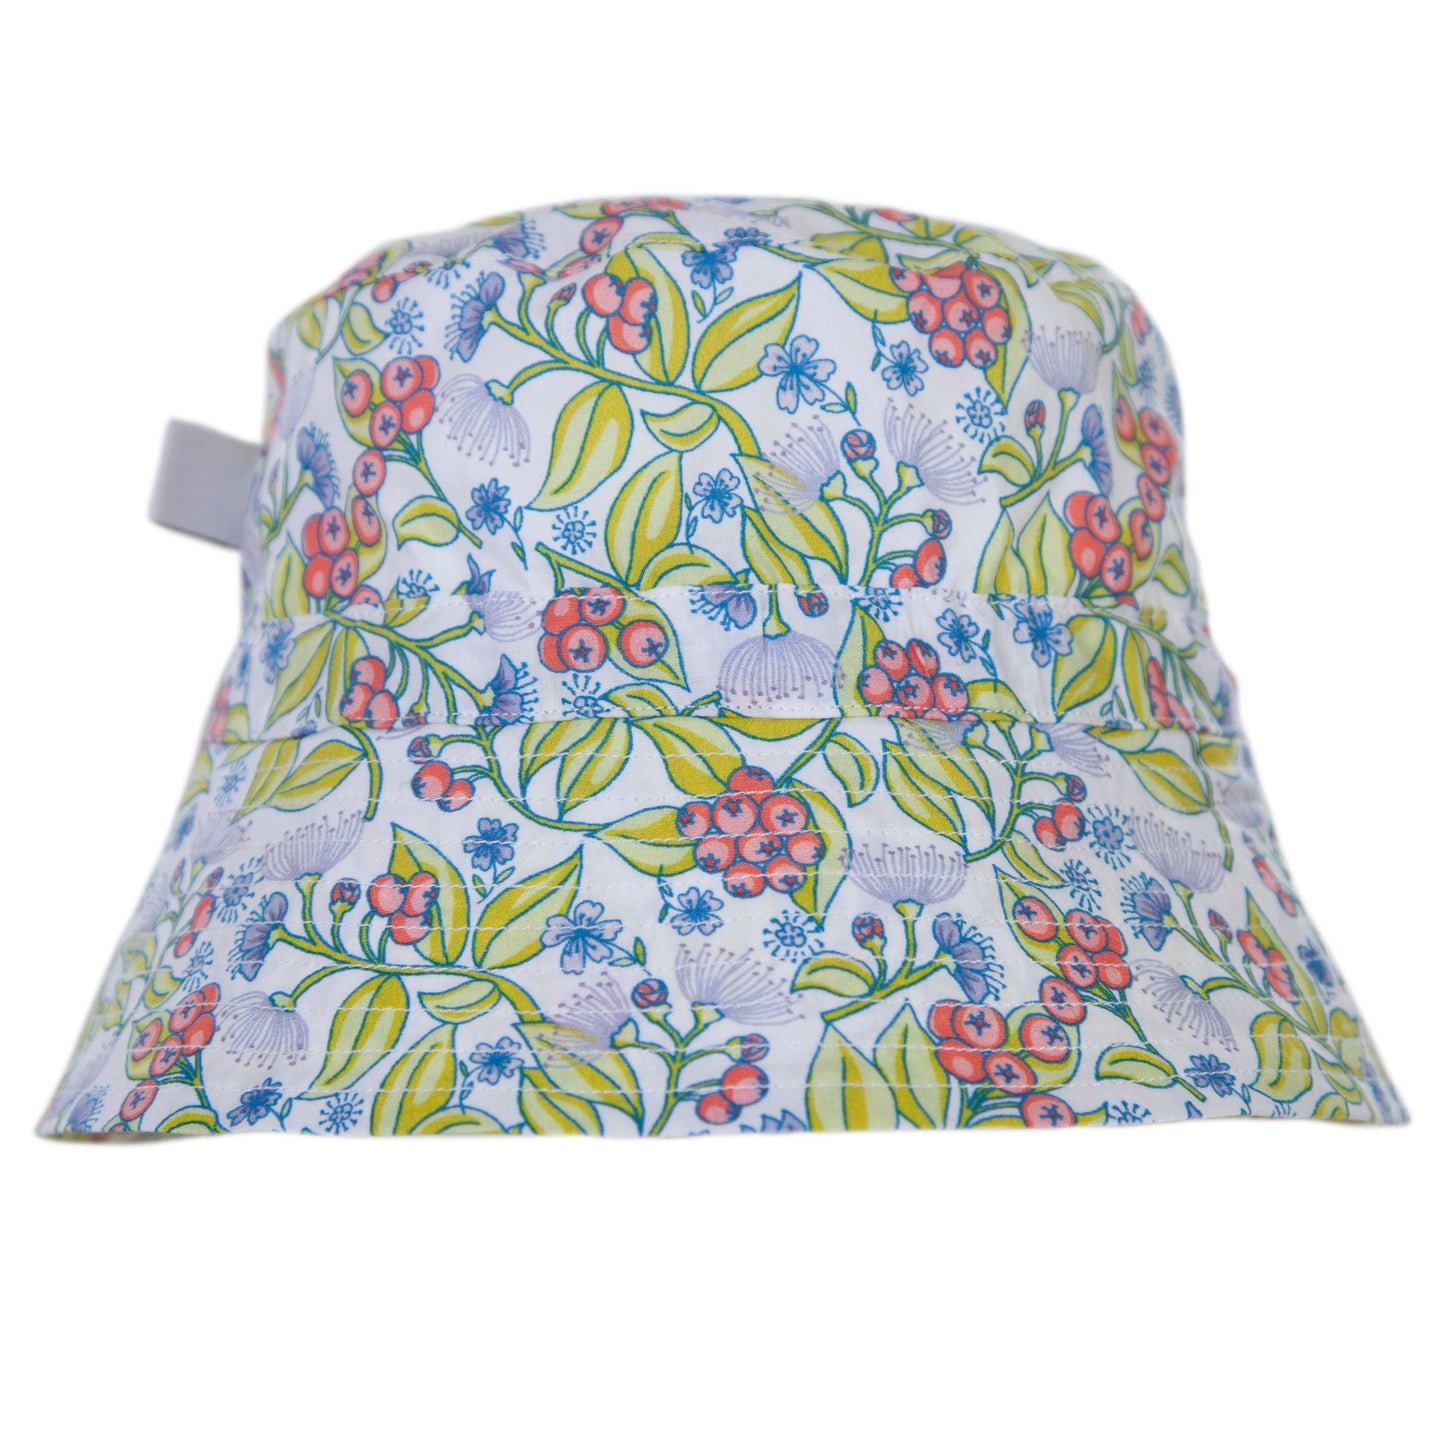 Melissa Hat Lilly Pilly